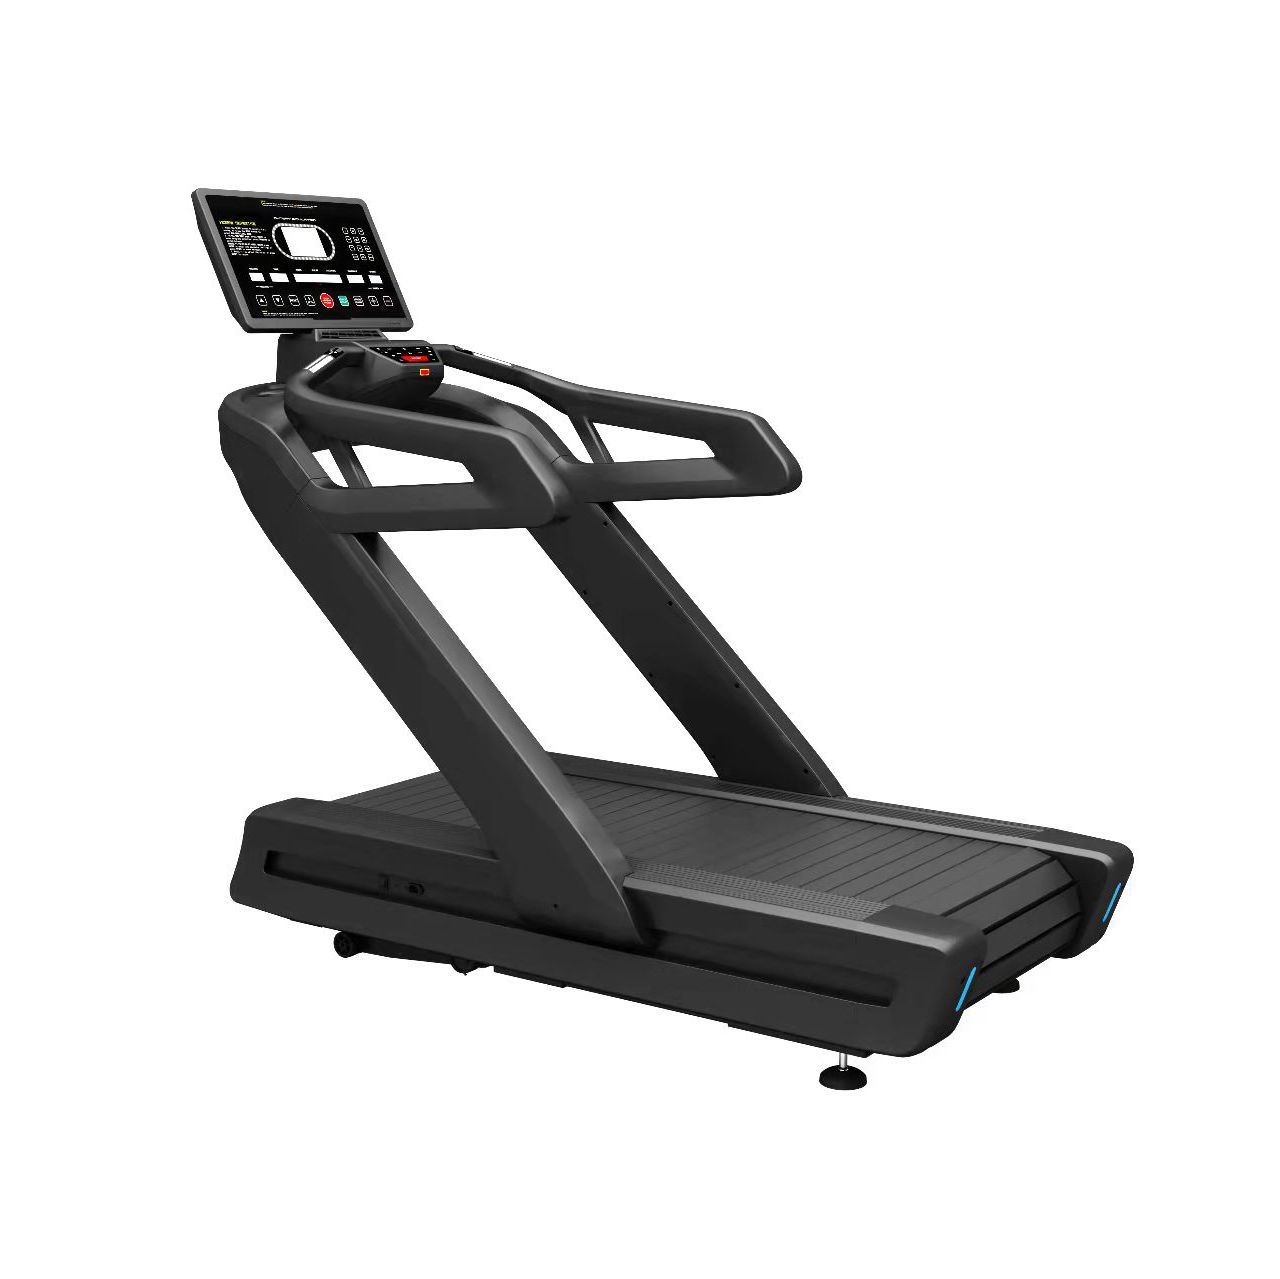 MND-X700 New Arrival Gym Equipment Commercial Cardio Machine 2 In 1 Crawler Treadmill Featured Image